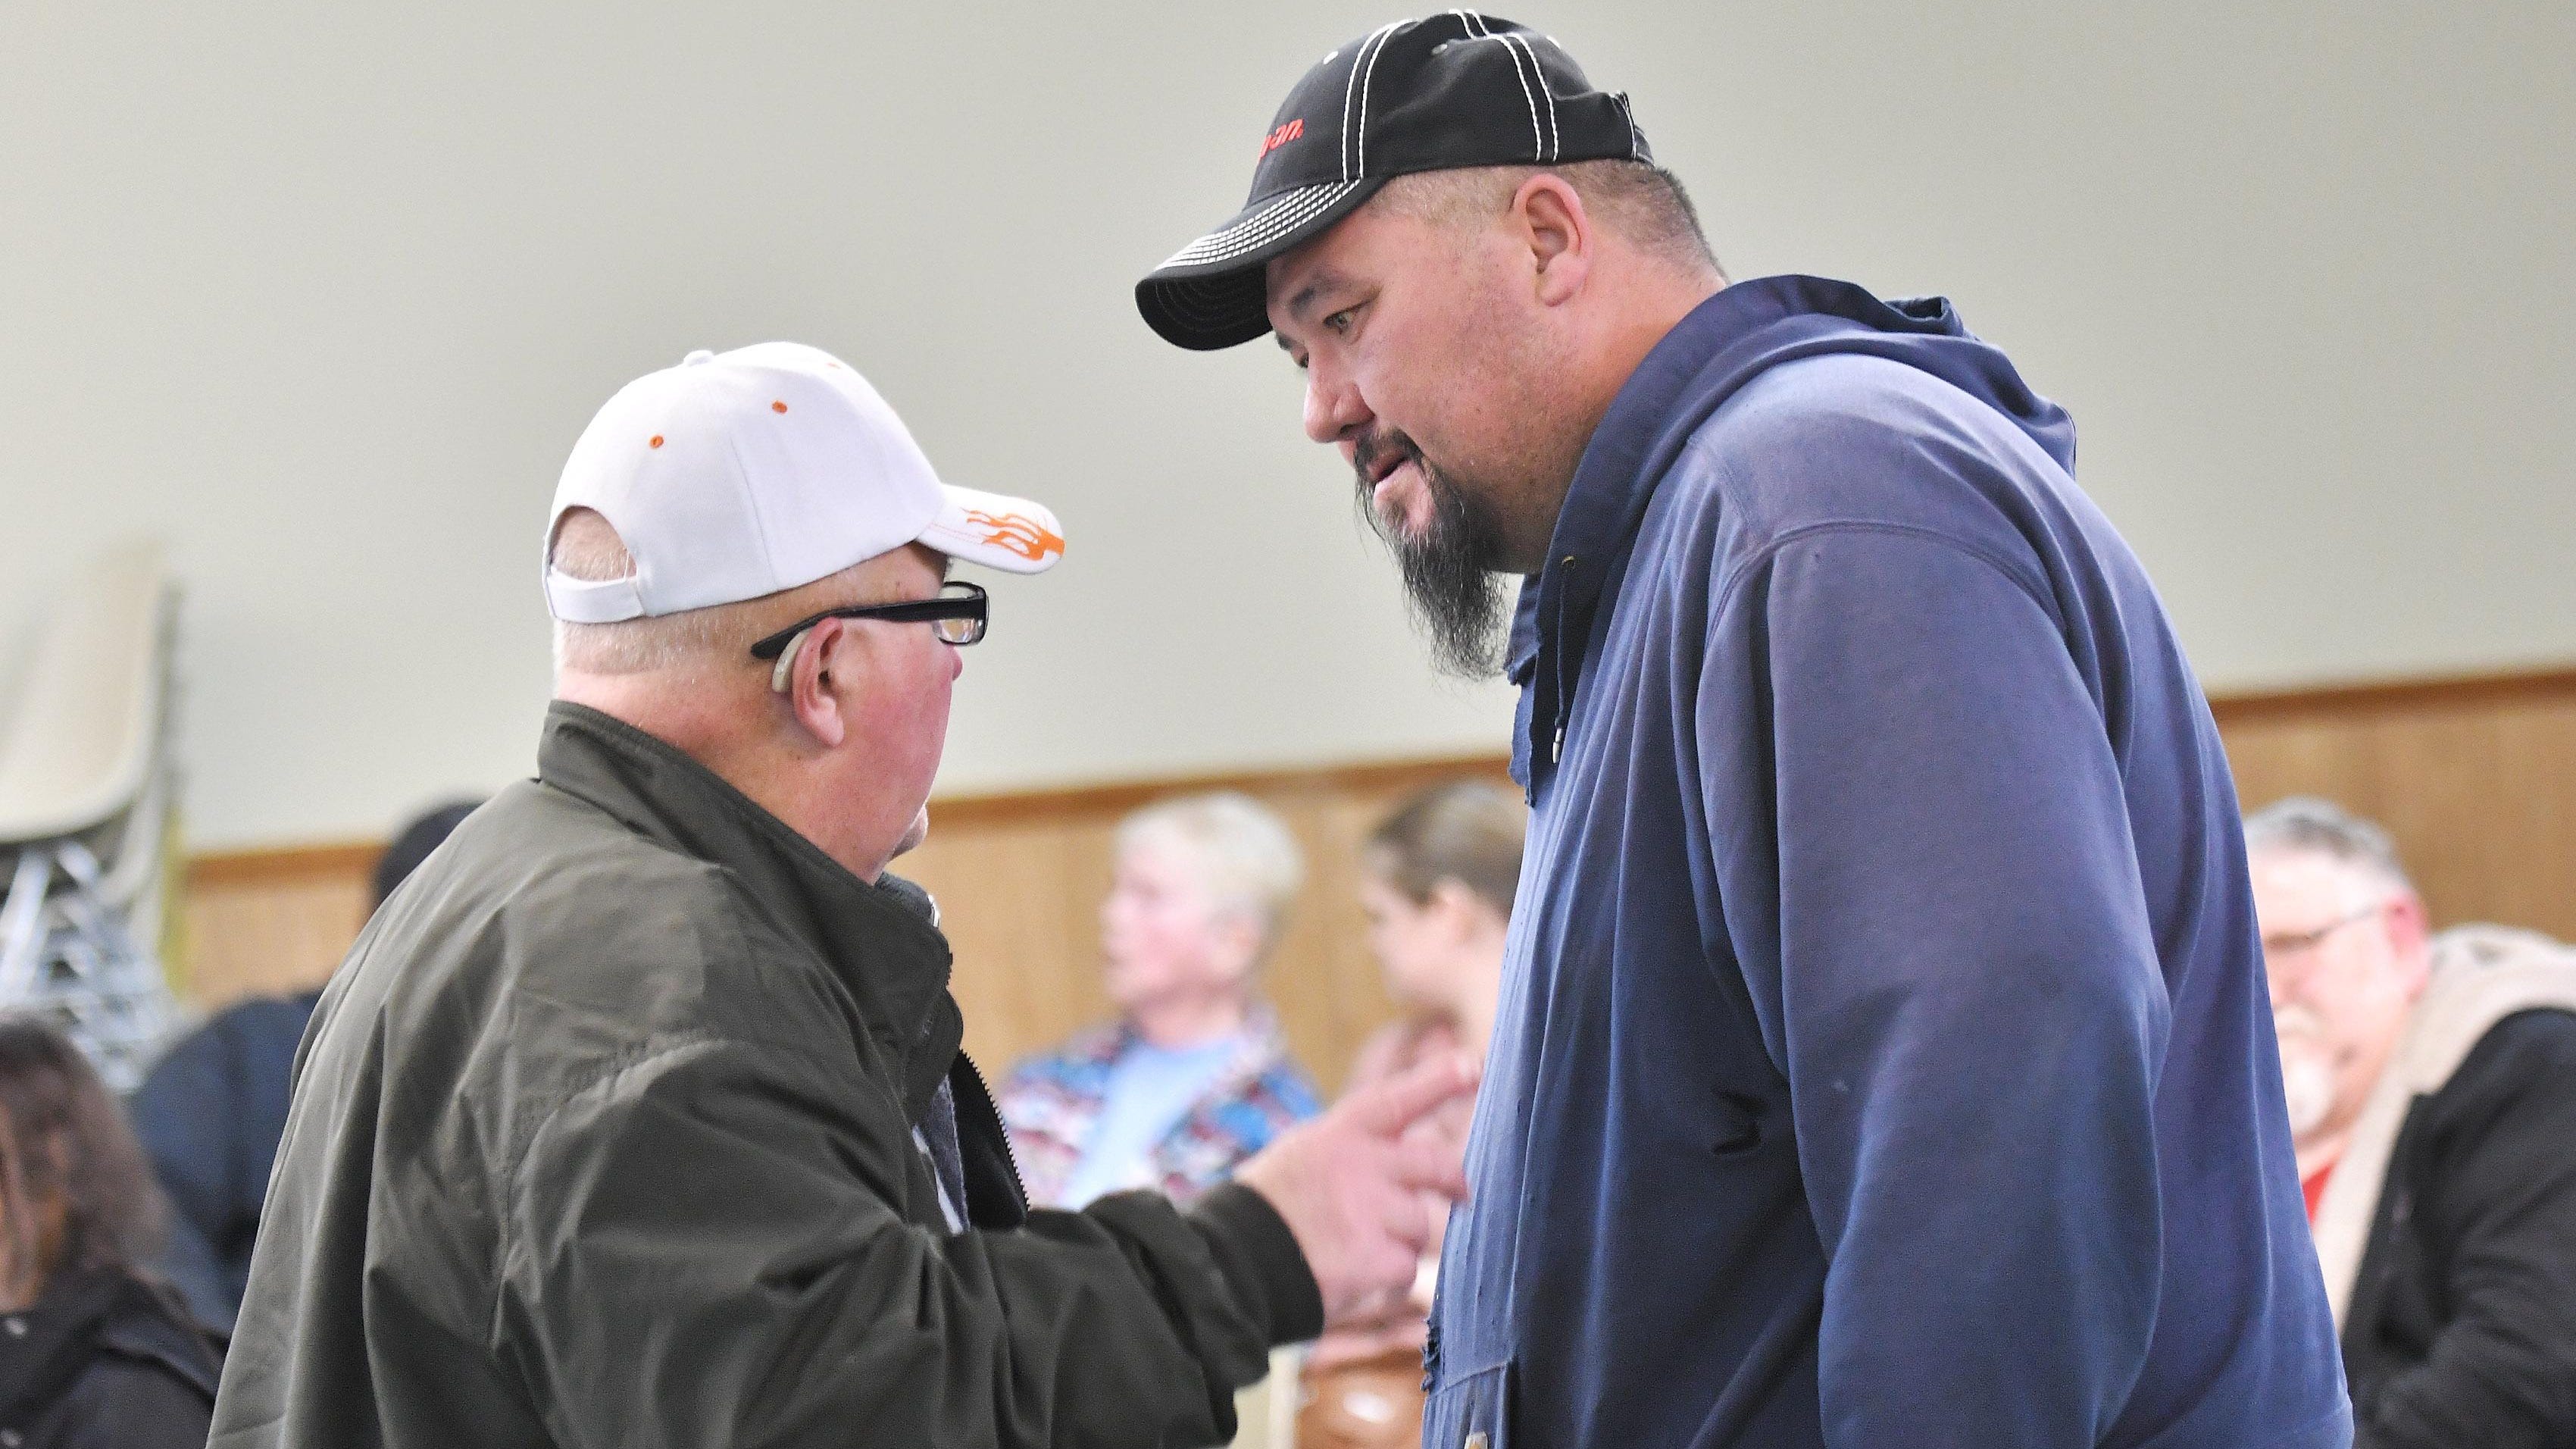 Gregg Bryan, left, and Eugene Lehr began a recall bid against Thetford supervisor Gary Stevens and trustee Stan Piechnik, who have looked into the equipment issues.